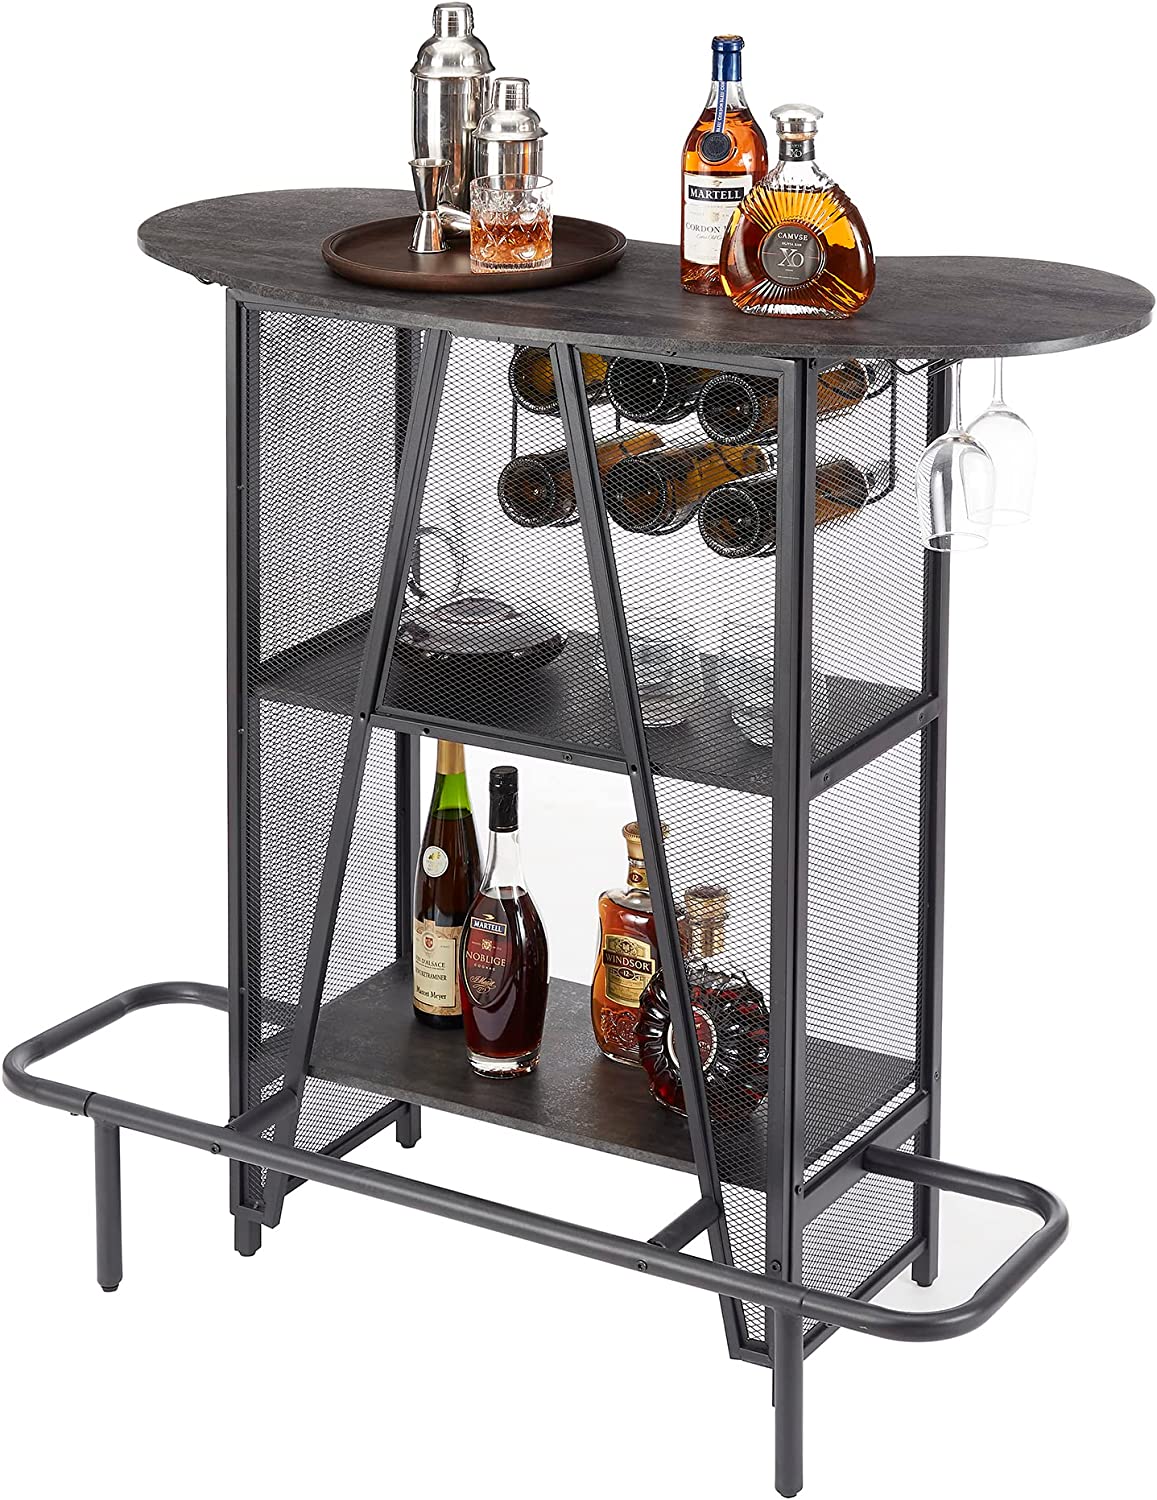 VECELO Bar Unit with Metal Mesh Front, 3-Tier Wine Rack Table with Glasses Holder for Living Room, Kitchen